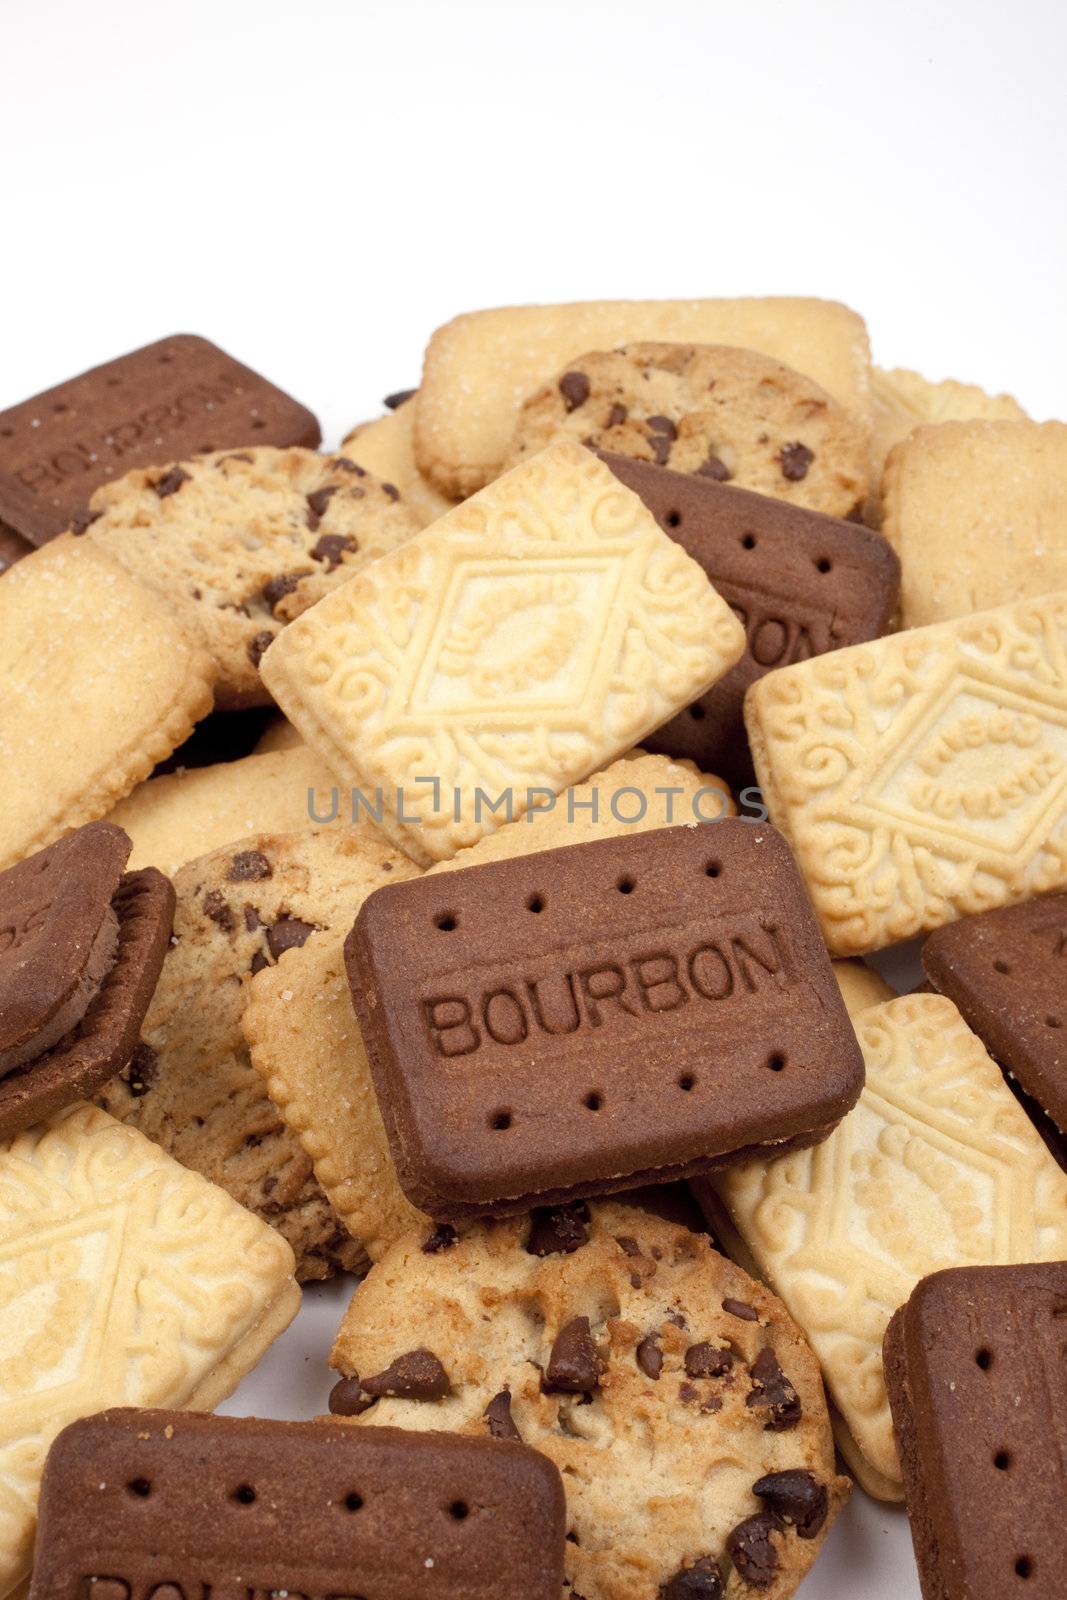 A selection of biscuits on a white background.